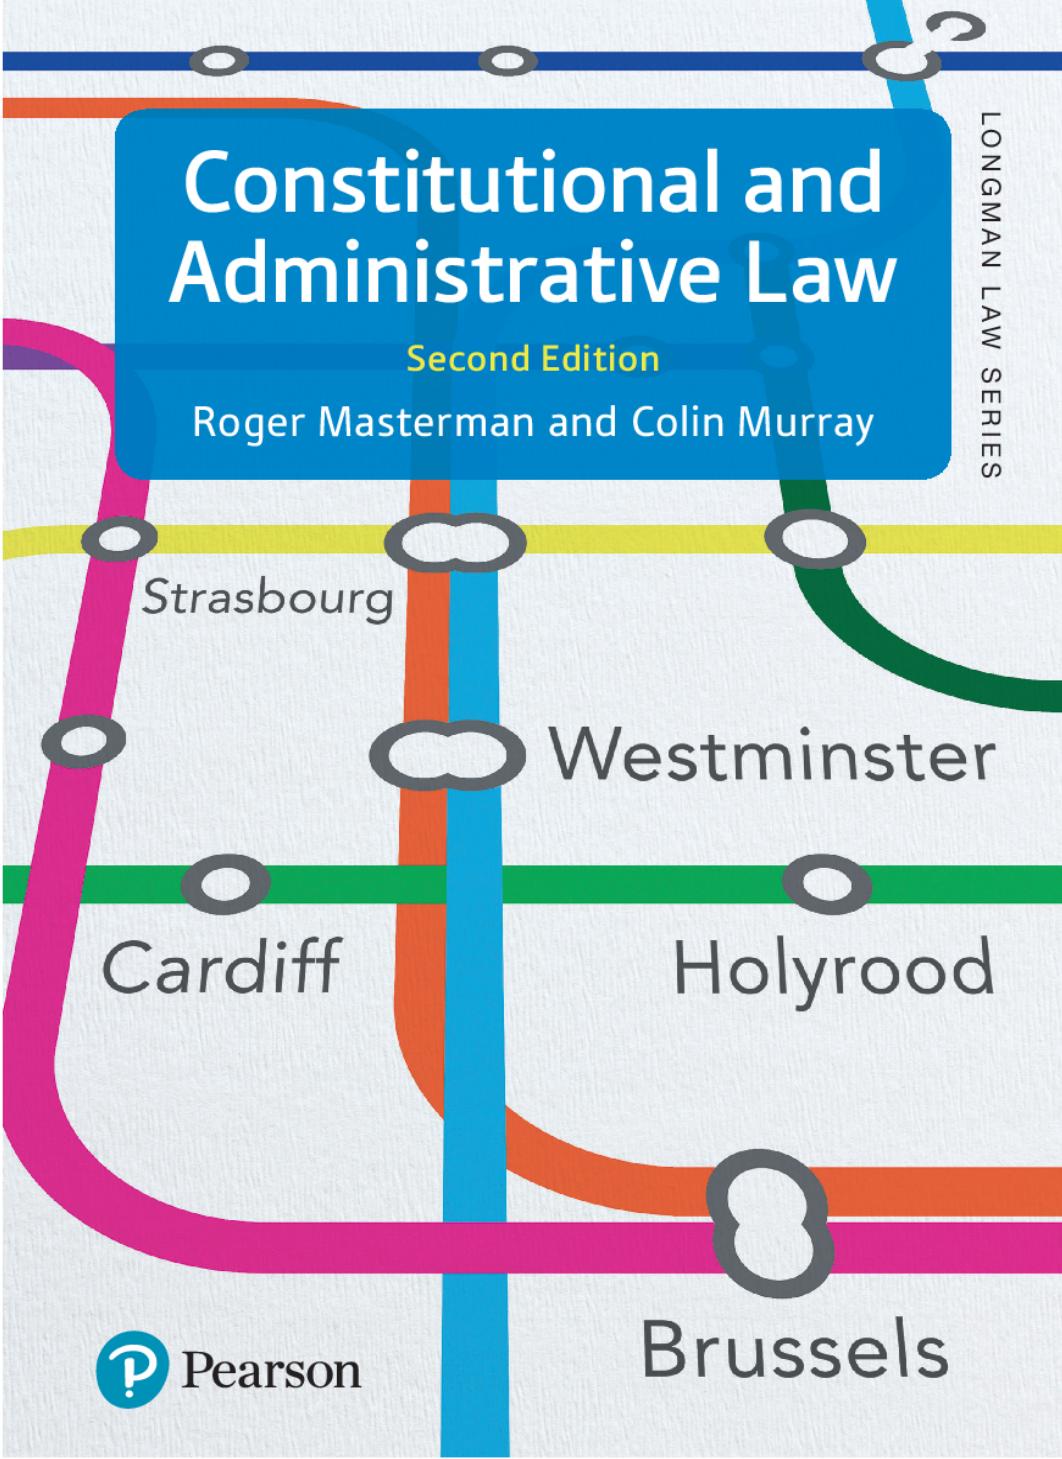 Constitutional and Administrative Law, 2nd Edition  by Roger Masterman , Mr Colin Murray